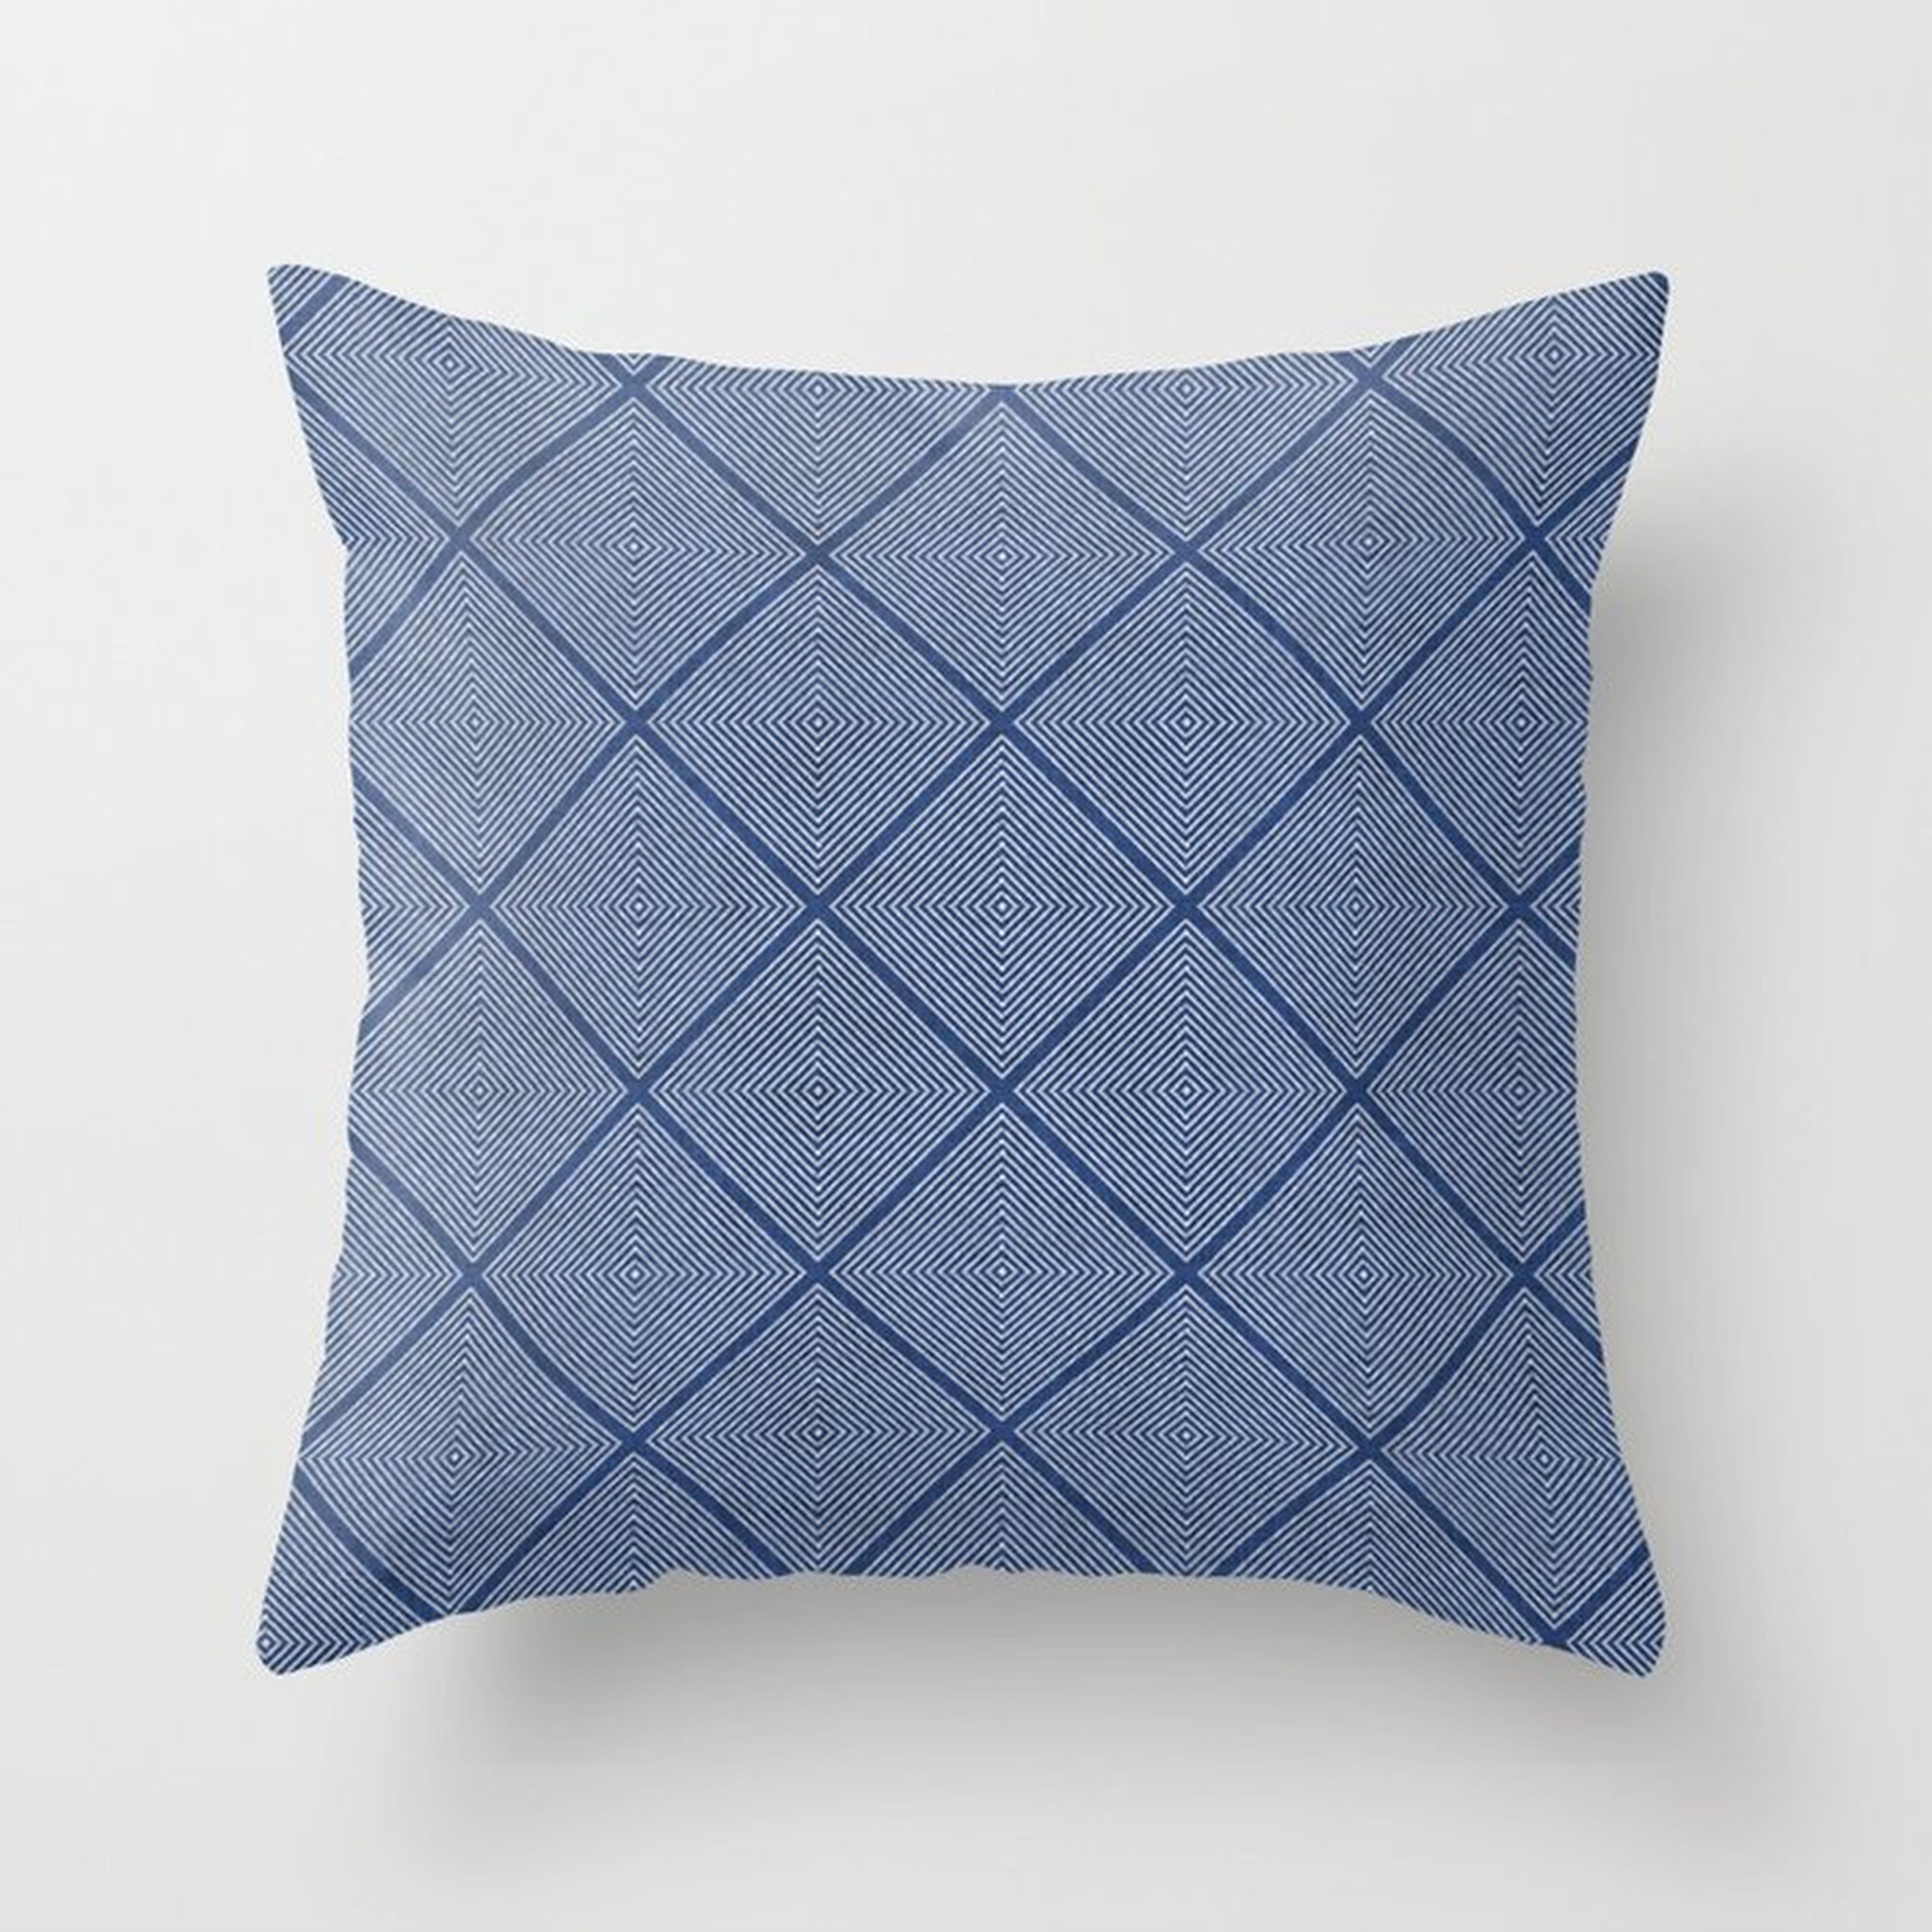 Stitched Diamond Geo In Blue Couch Throw Pillow by Becky Bailey - Cover (20" x 20") with pillow insert - Outdoor Pillow - Society6